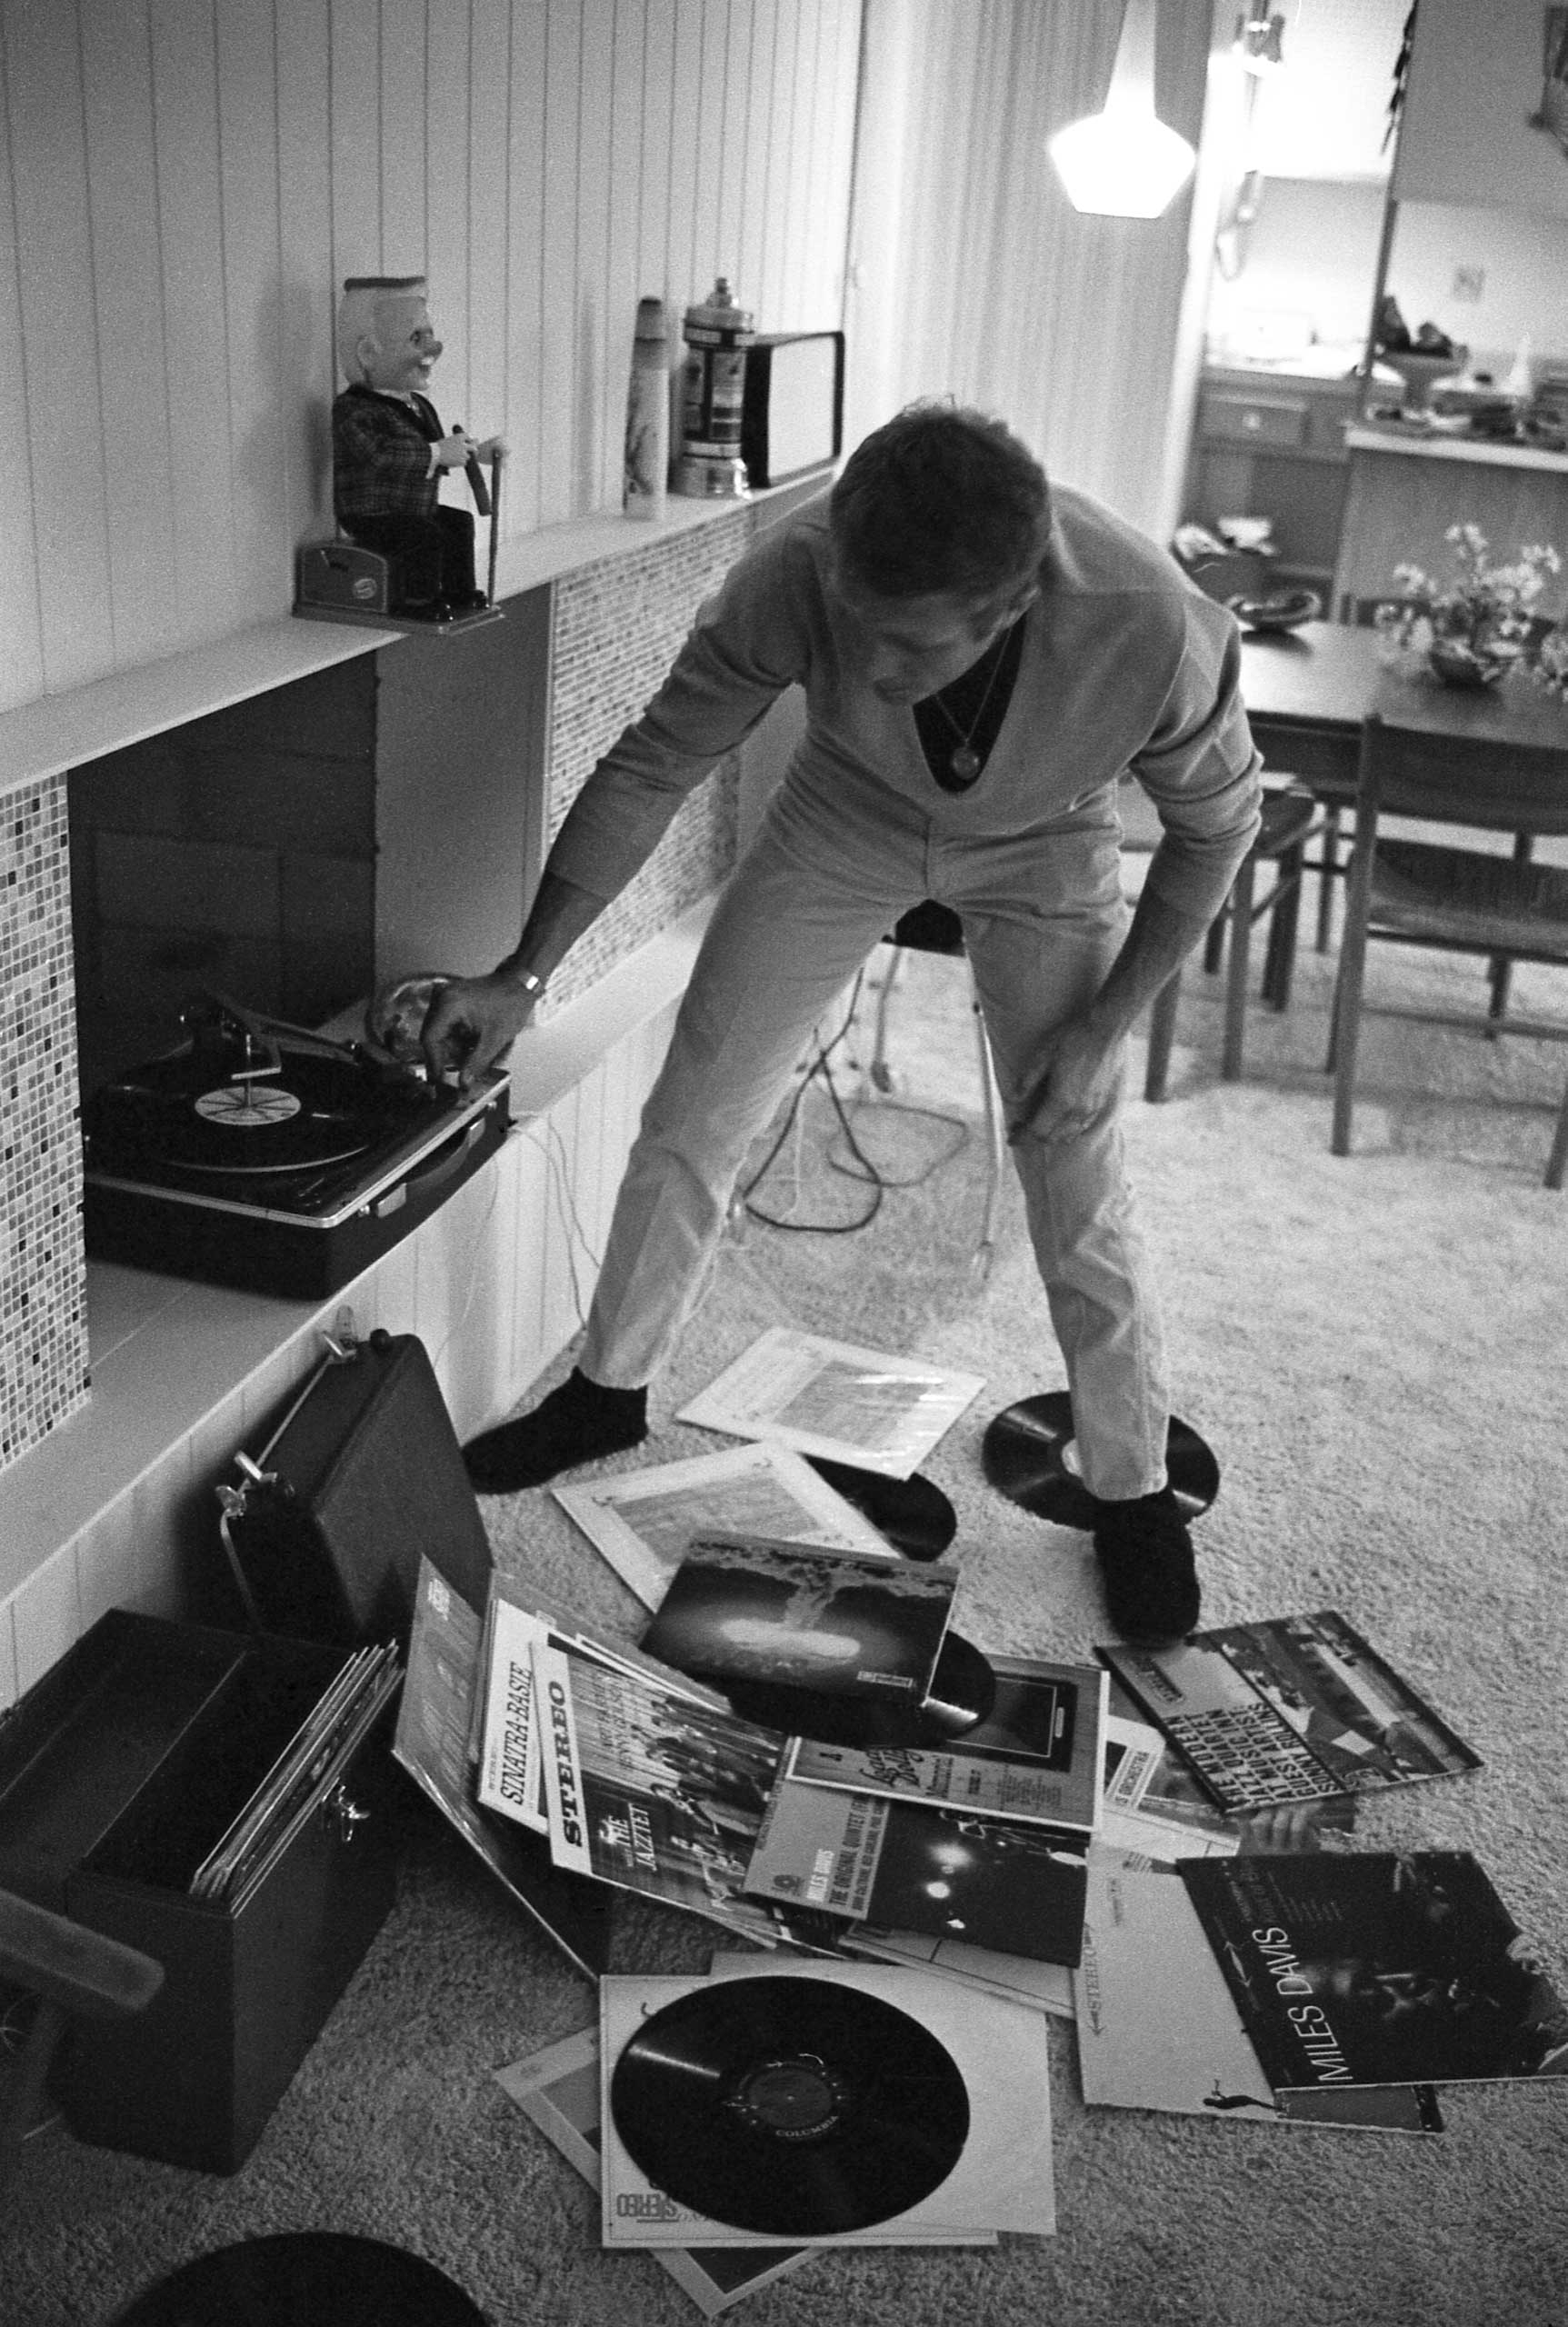 At his Palm Springs bungalow, Steve McQueen puts on a record, with LPs by Miles Davis, Sonny Rollins and Frank Sinatra scattered at his feet, 1963.